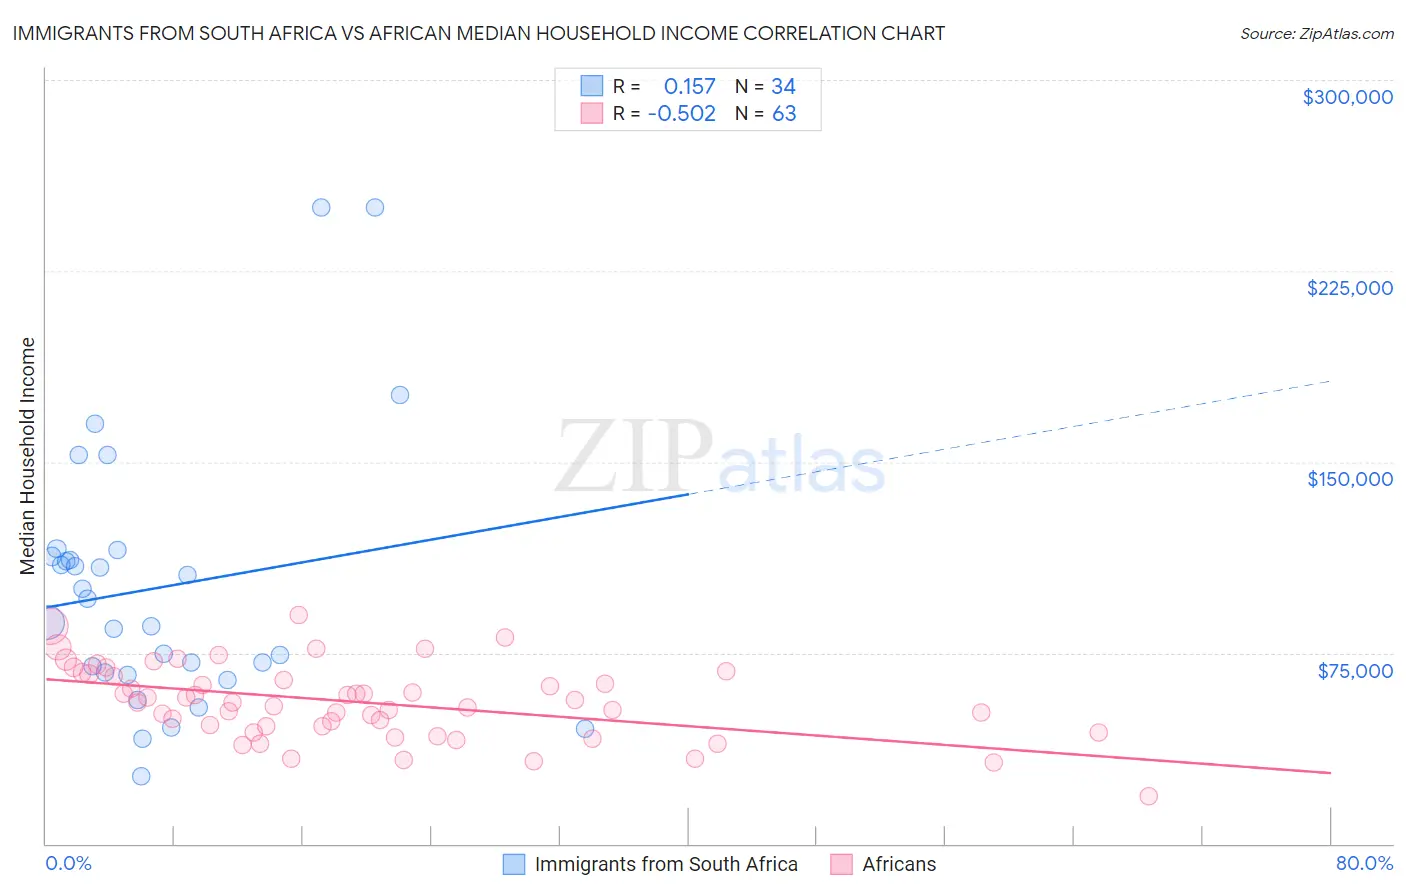 Immigrants from South Africa vs African Median Household Income